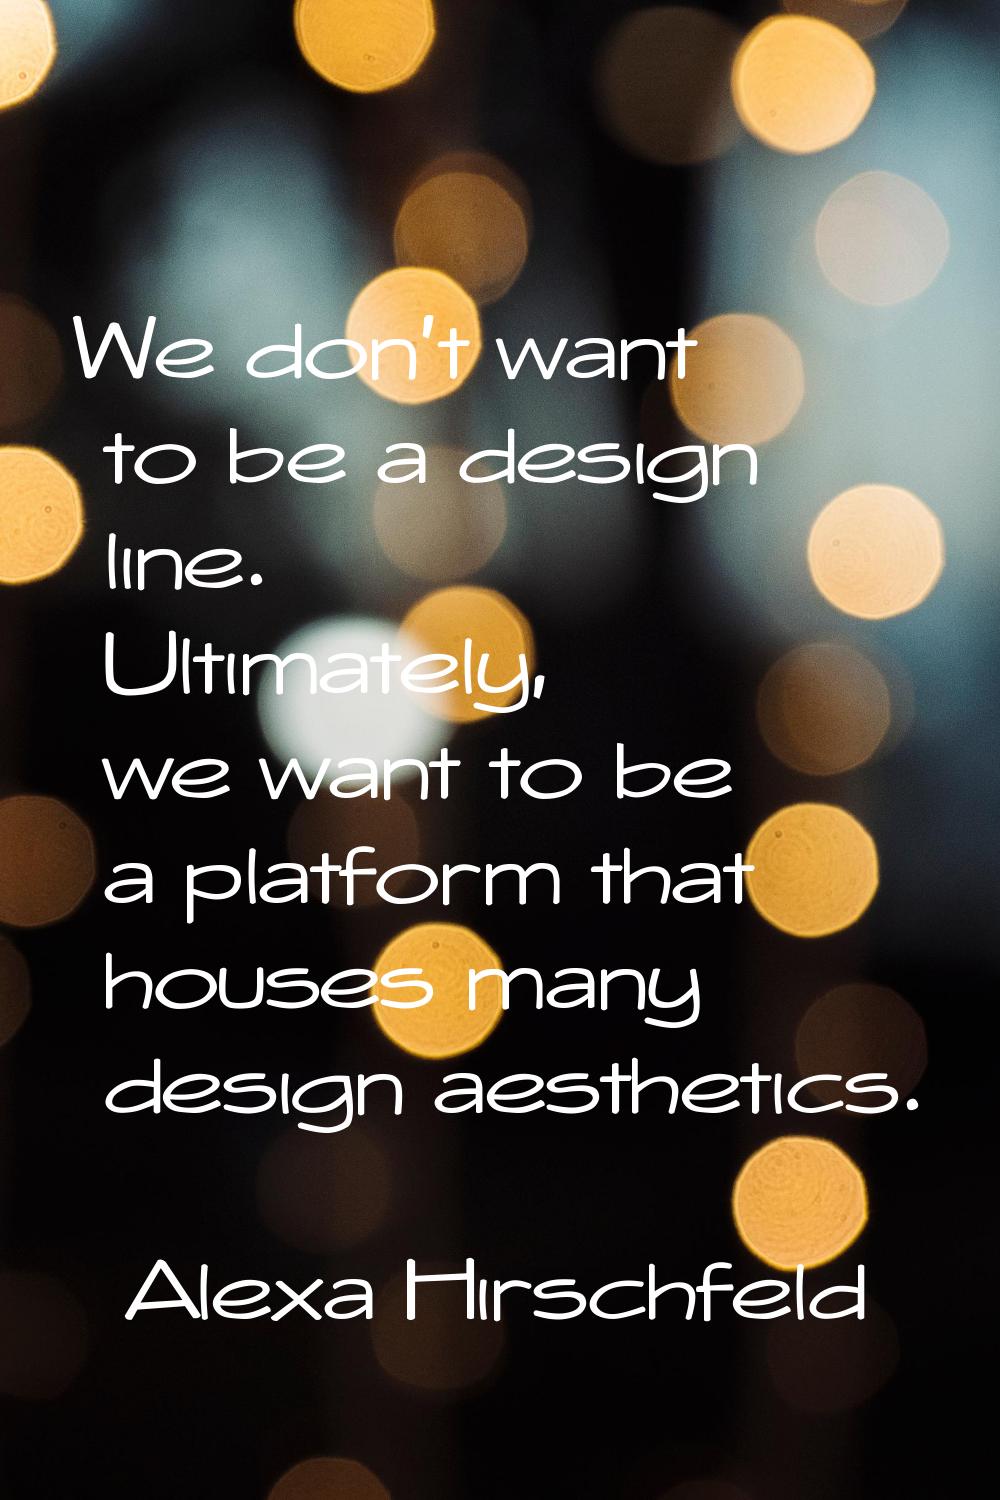 We don't want to be a design line. Ultimately, we want to be a platform that houses many design aes